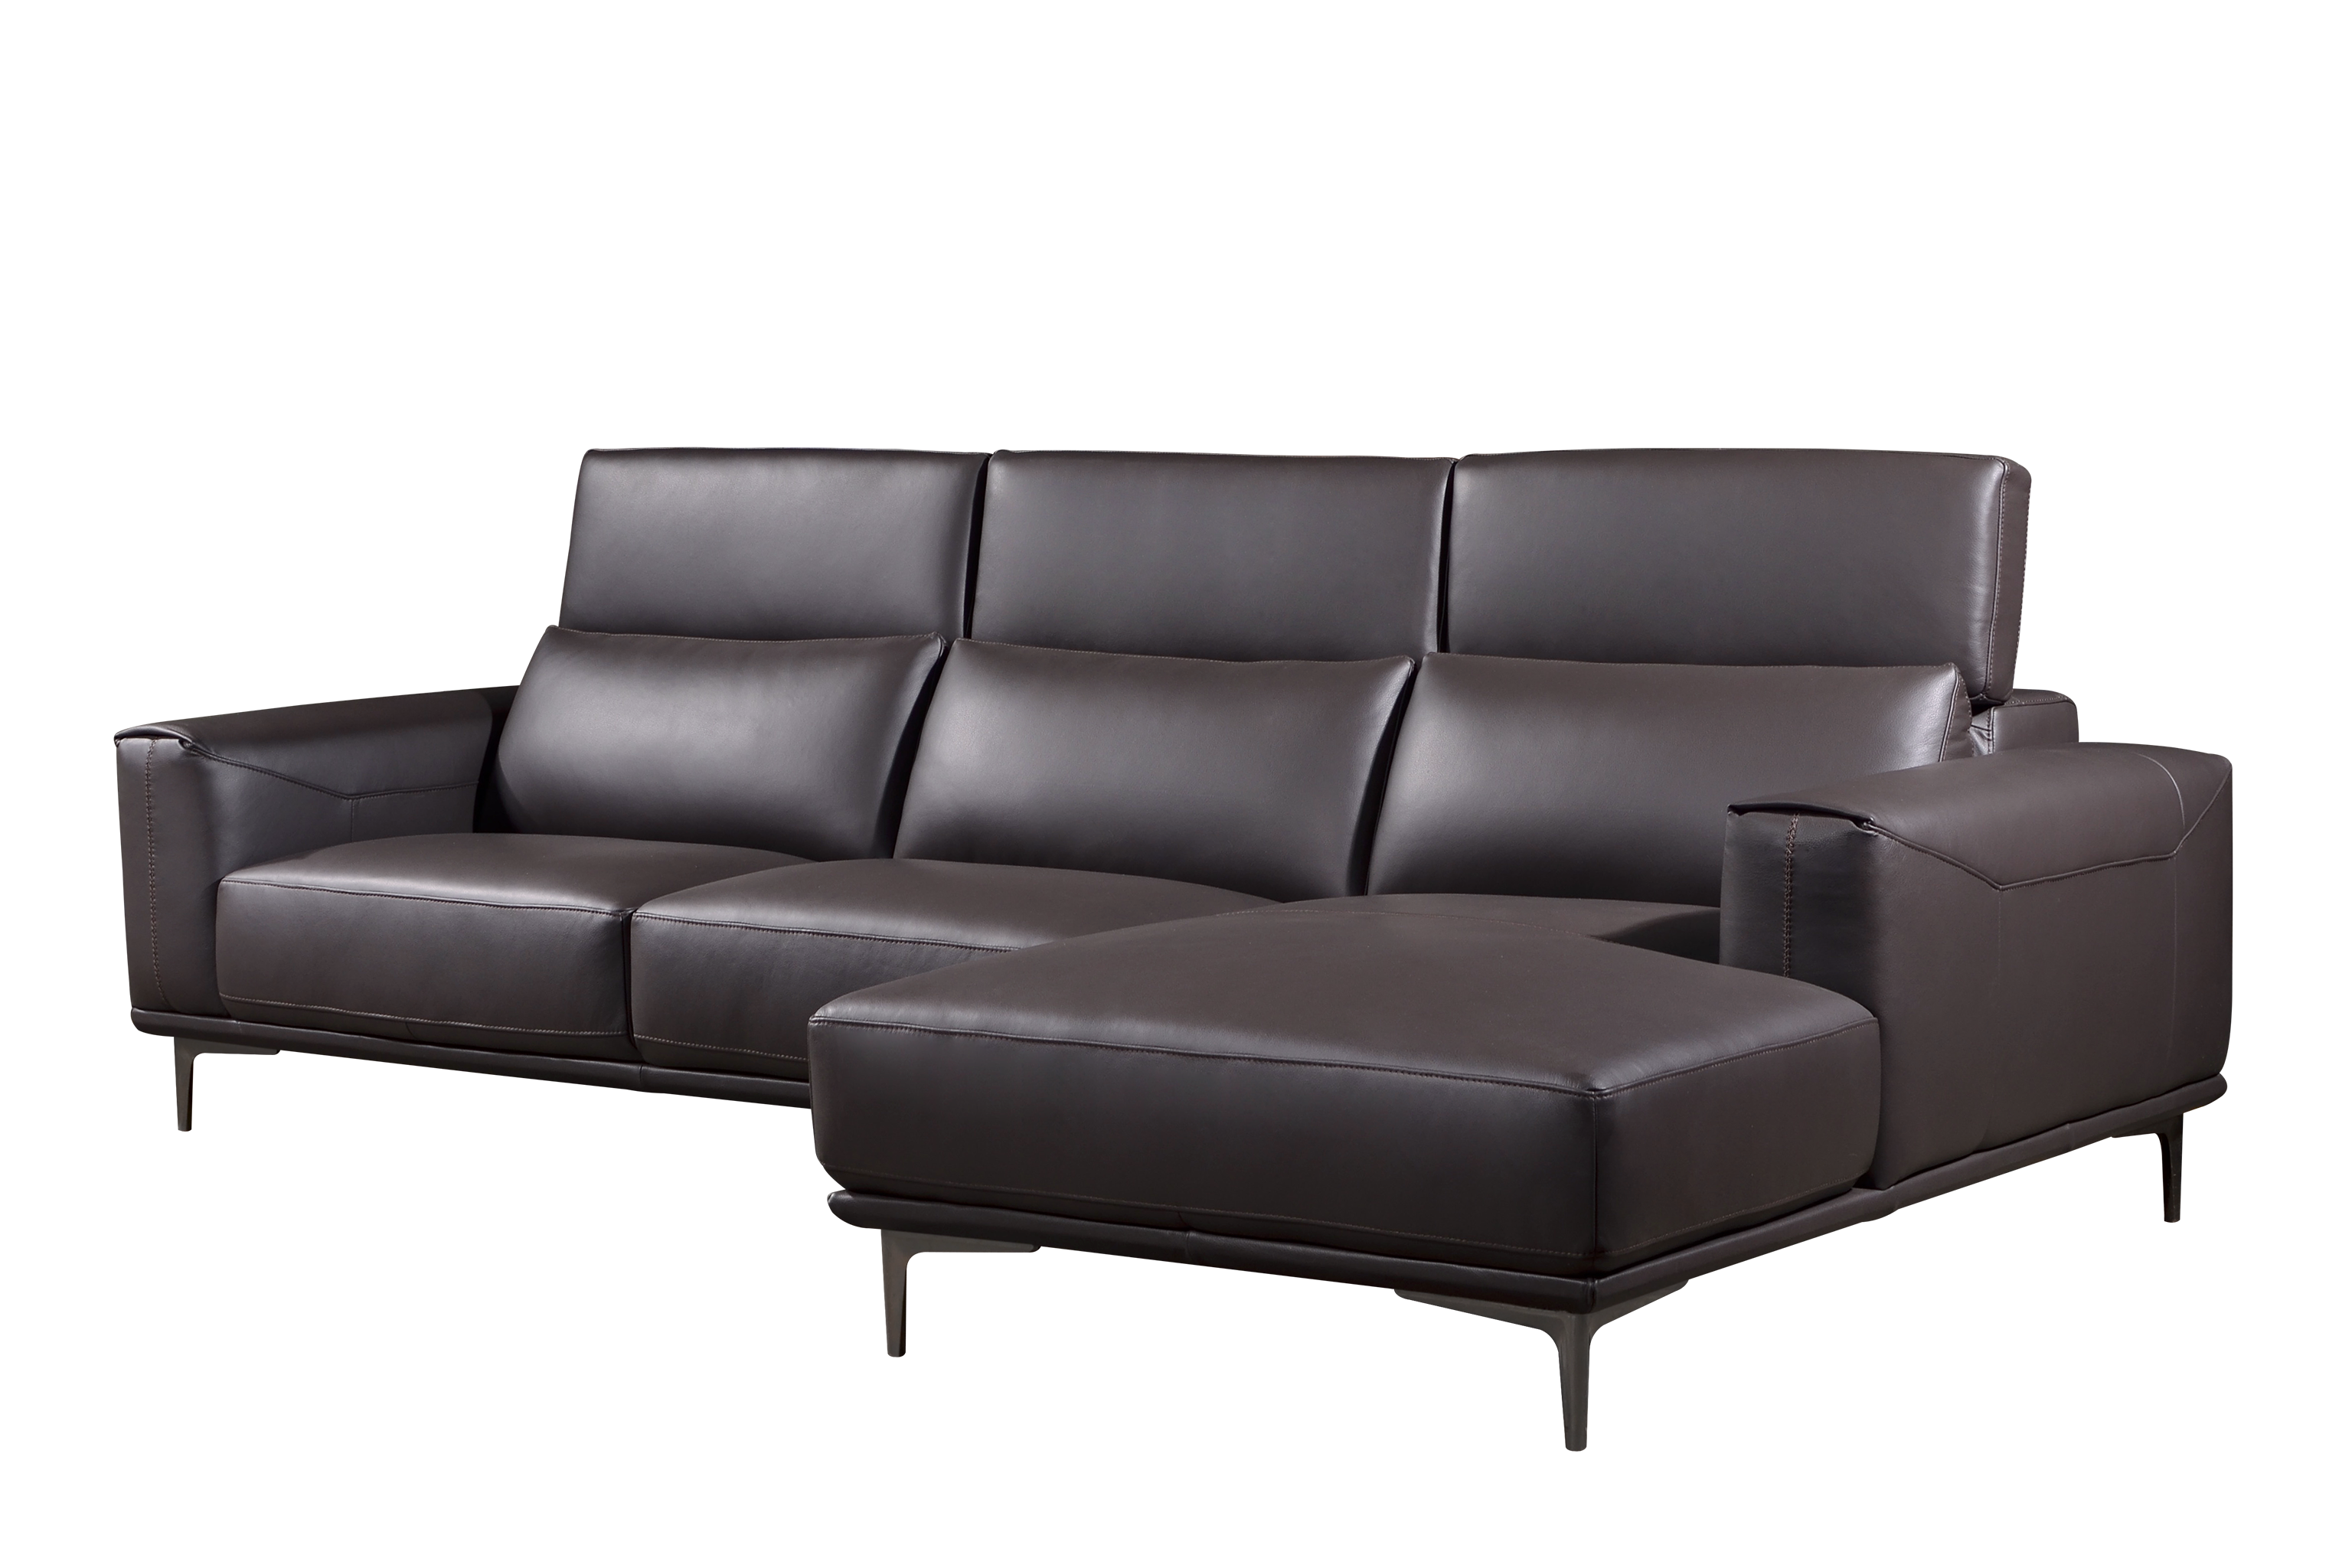 EVERSTON L-Shaped Sofa in Leather by Castilla